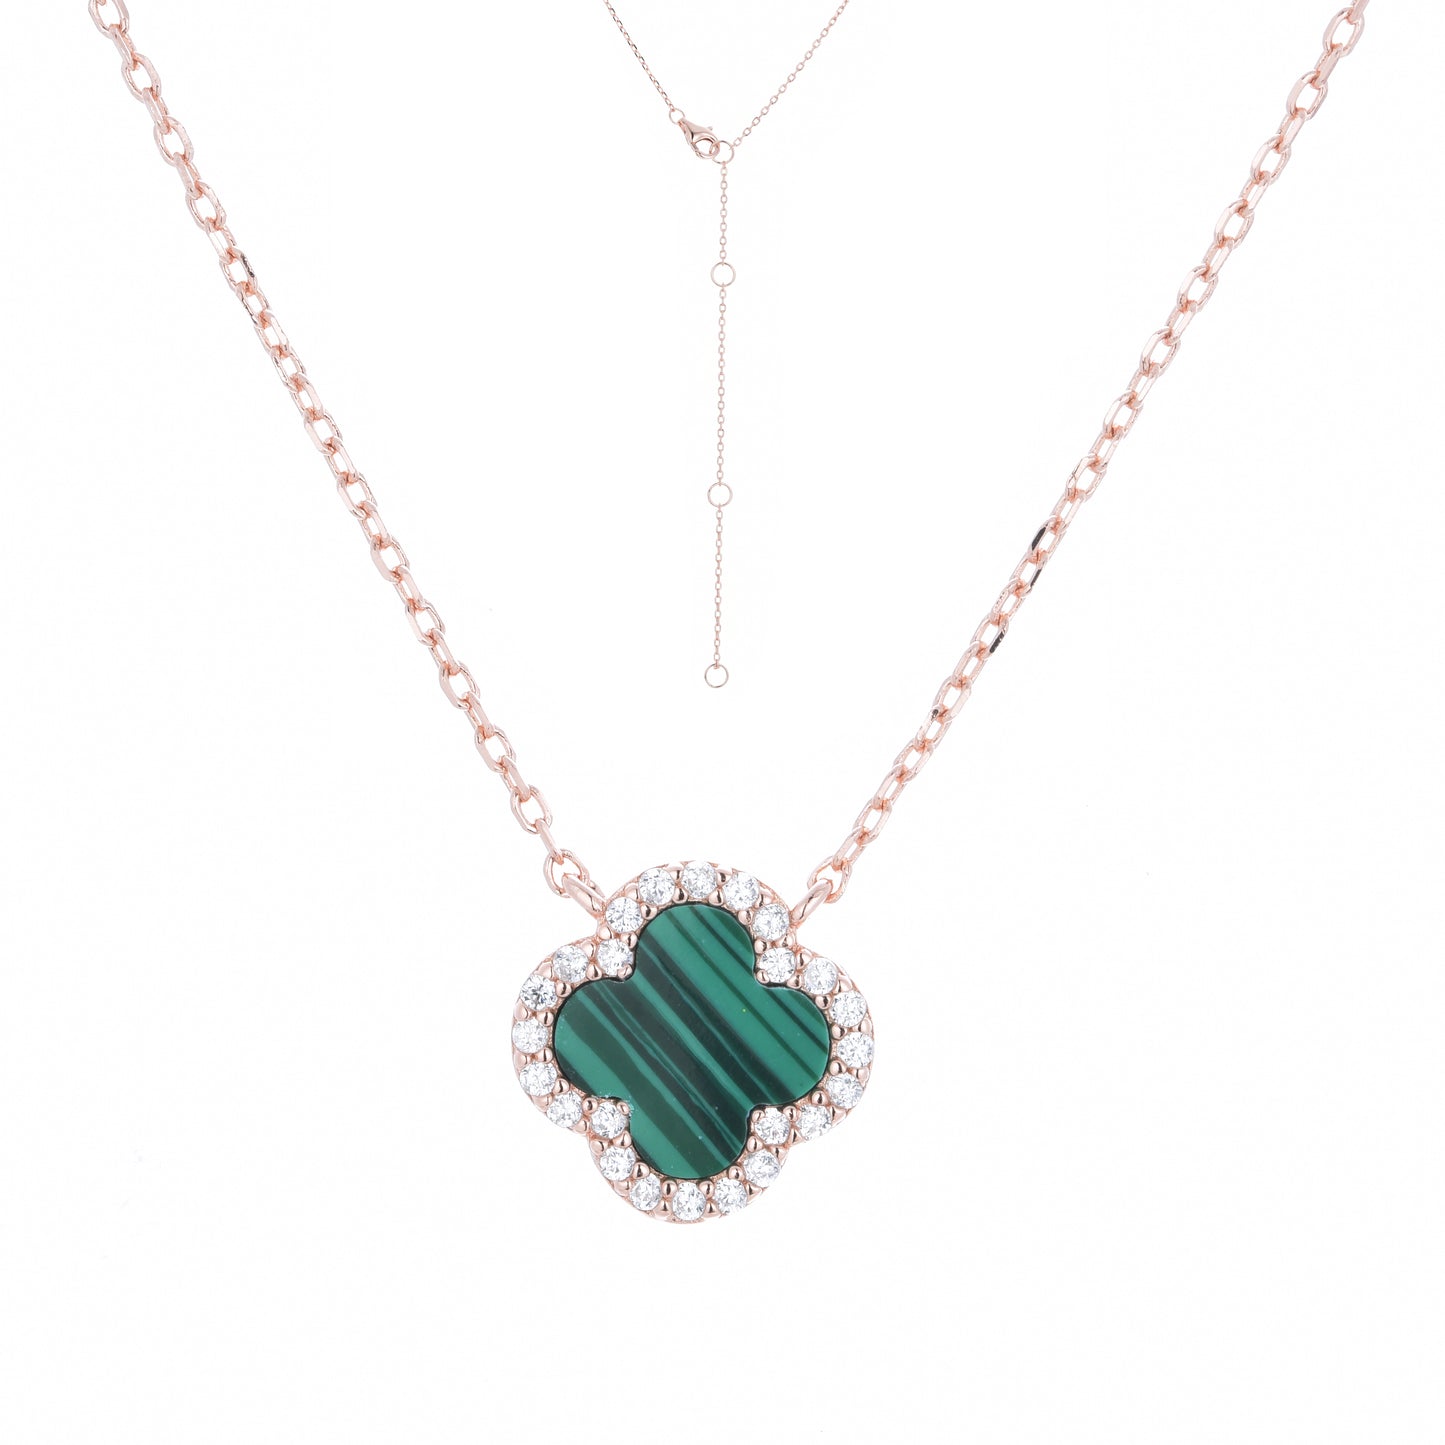 NG-5/R/M - Chain Necklace with Malachite Clover Charm